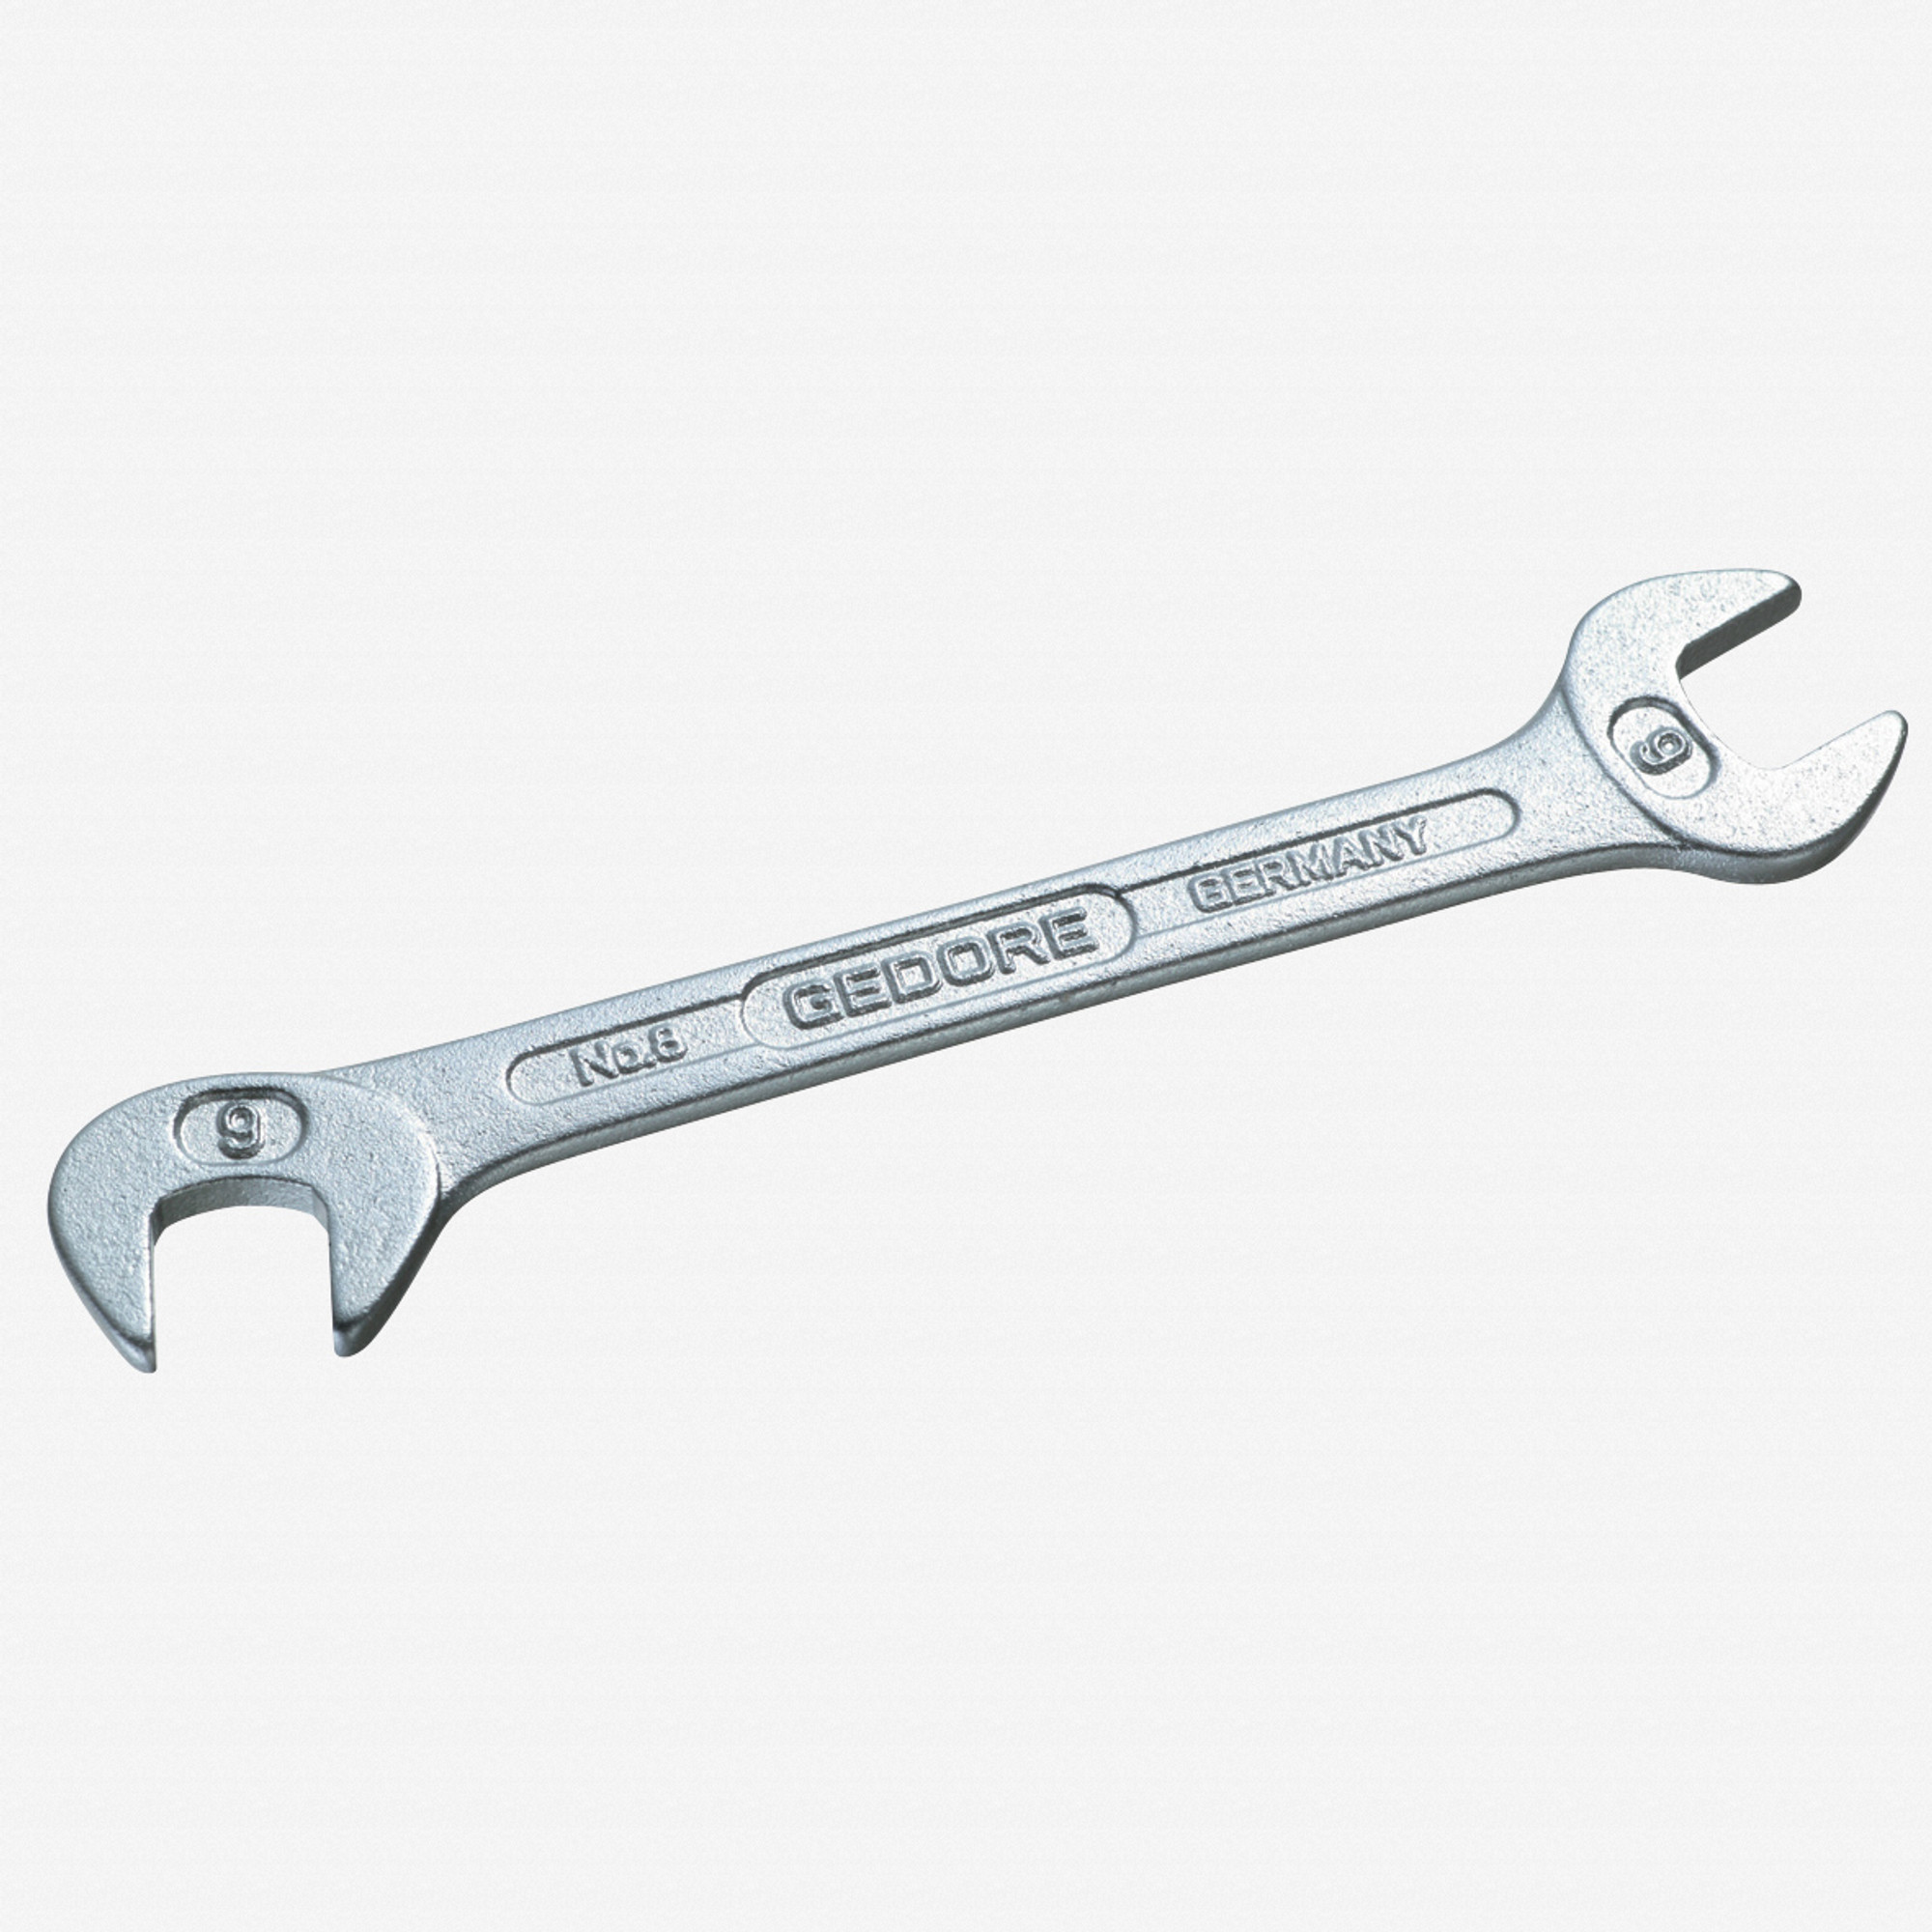 Gedore 8 10 Double ended midget spanner 10 mm